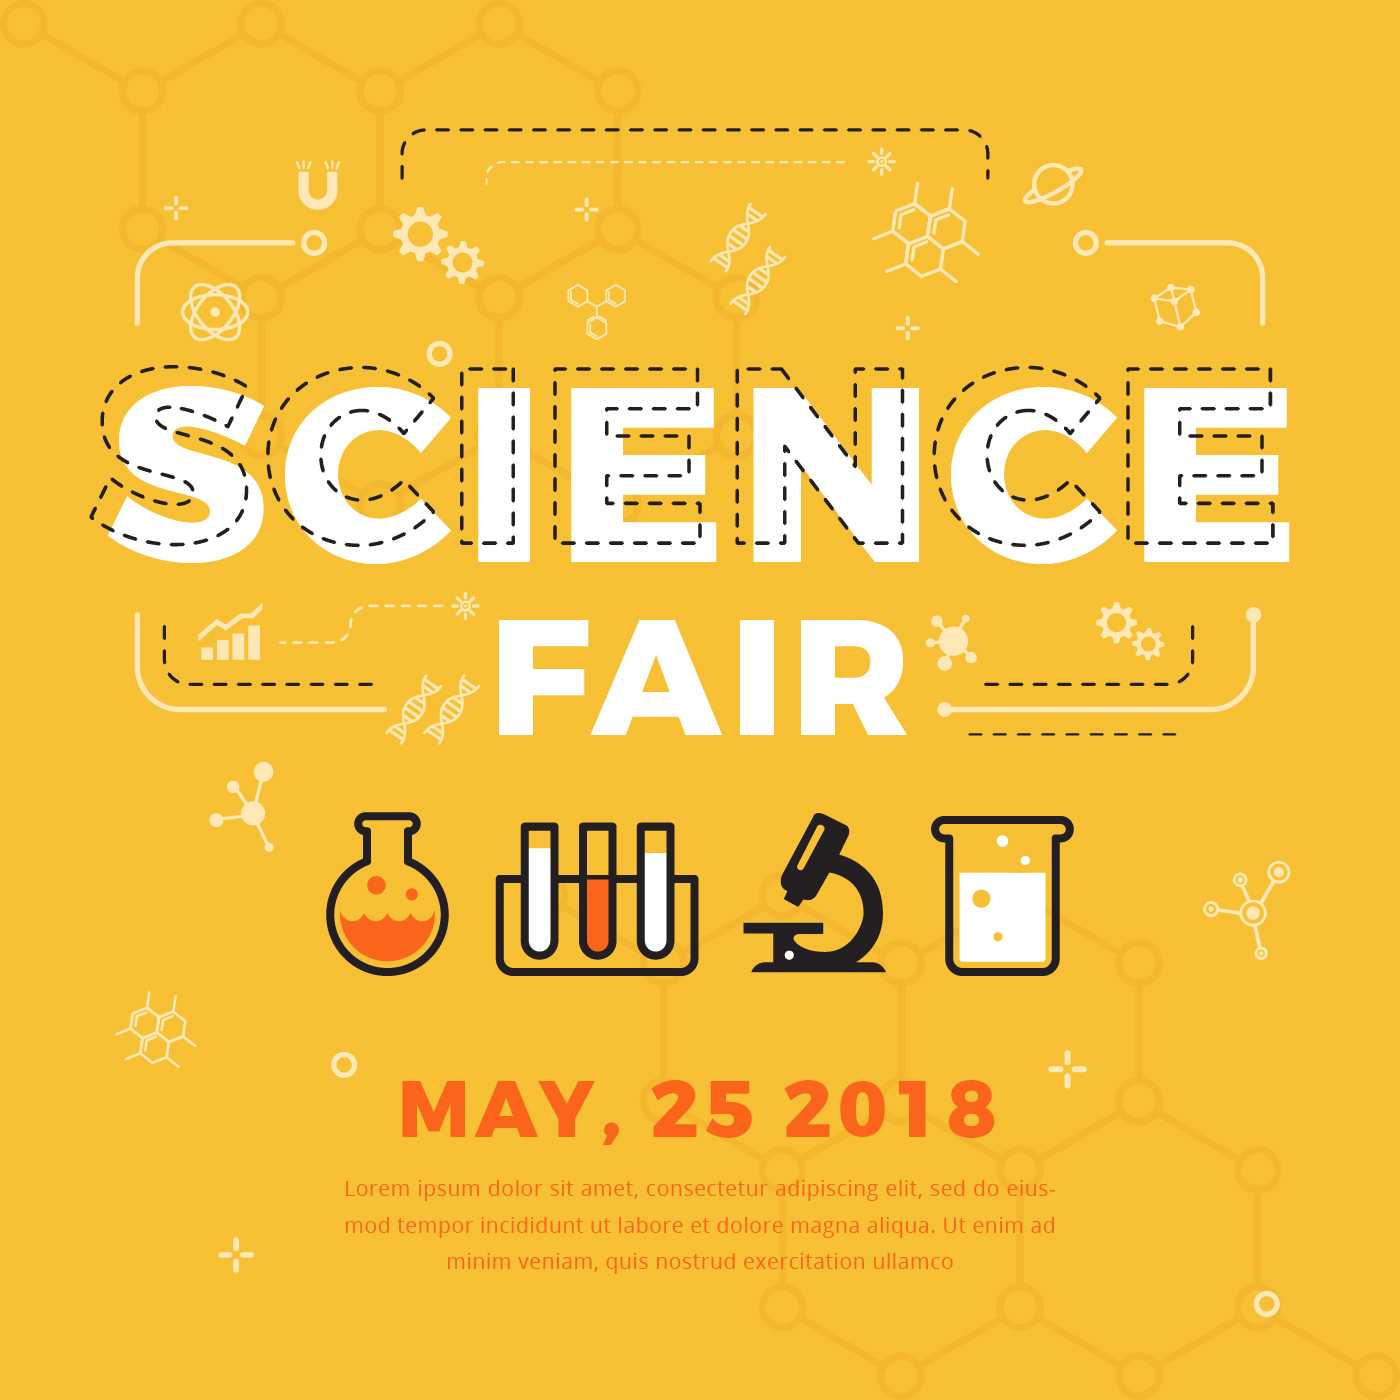 Science Fair Poster Vector – Download Free Vectors, Clipart Throughout Science Fair Banner Template